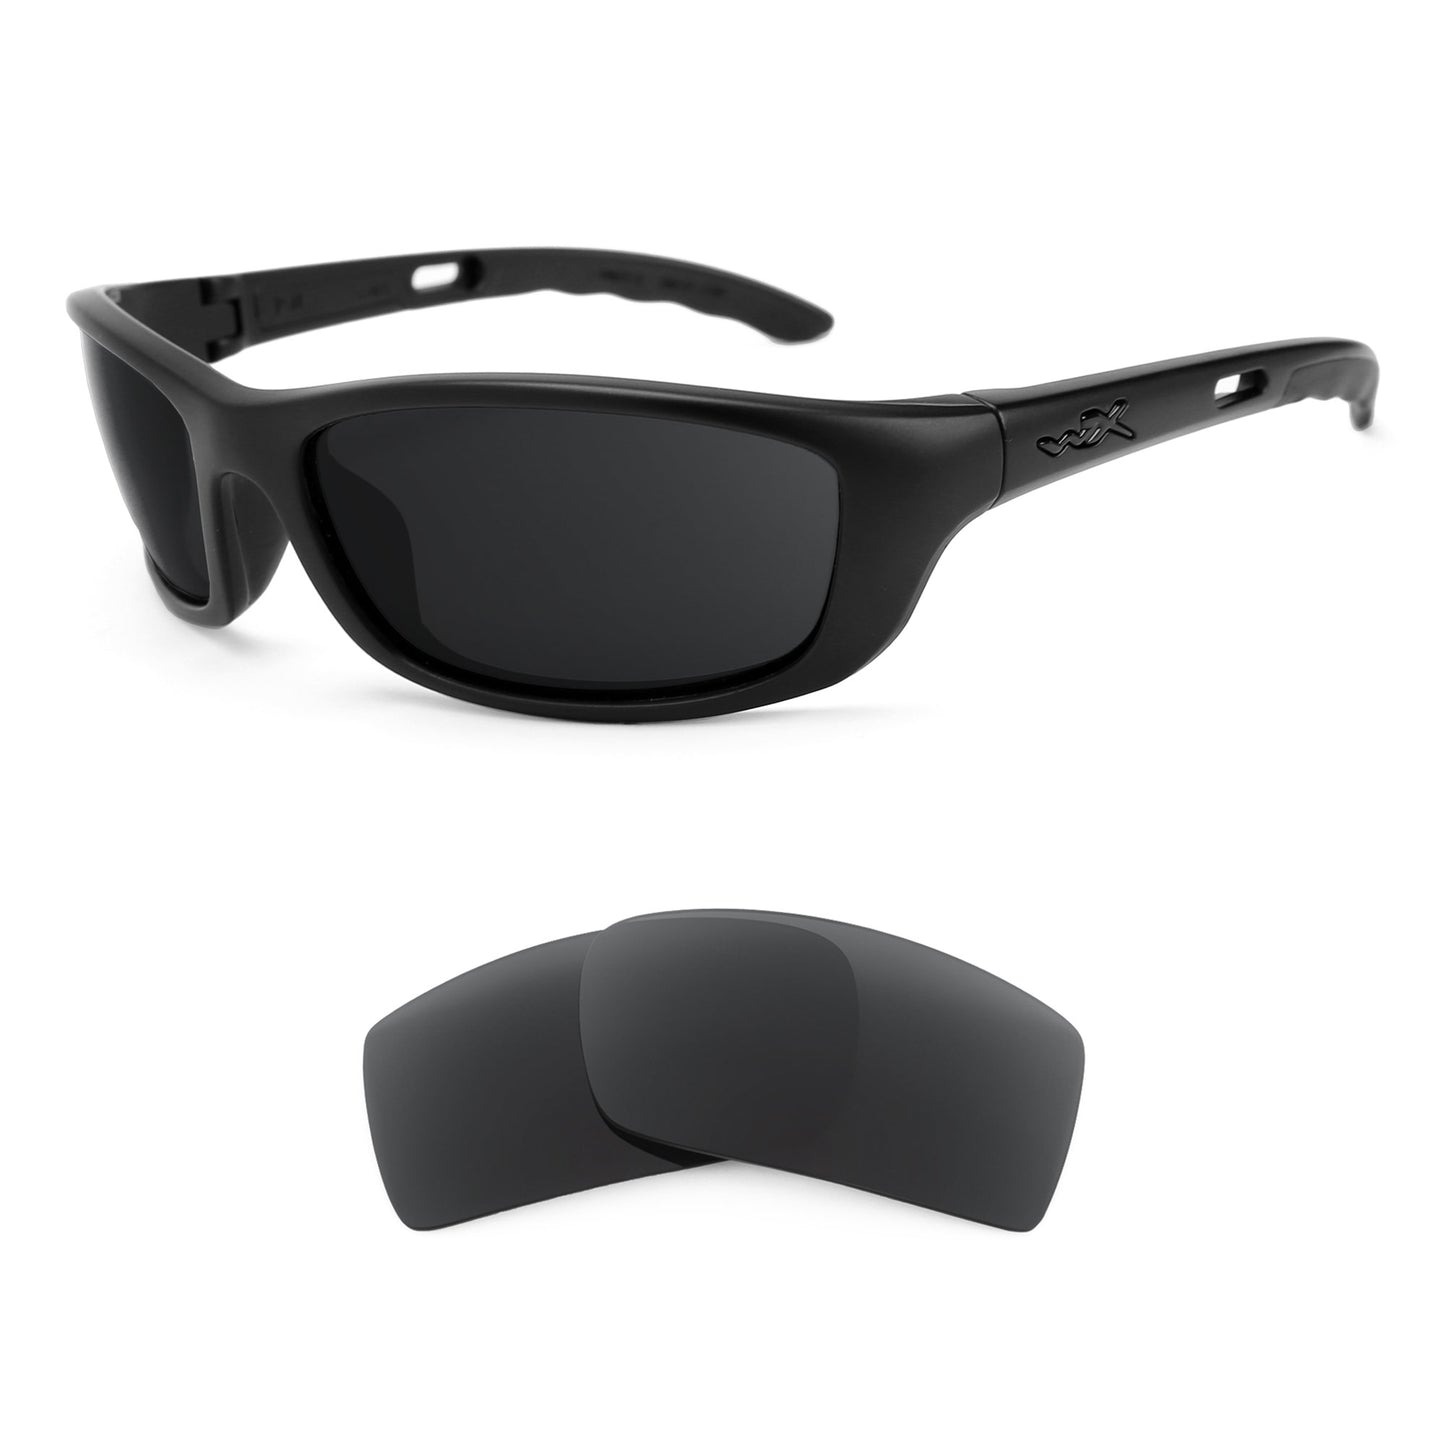 Wiley X P-17 sunglasses with replacement lenses